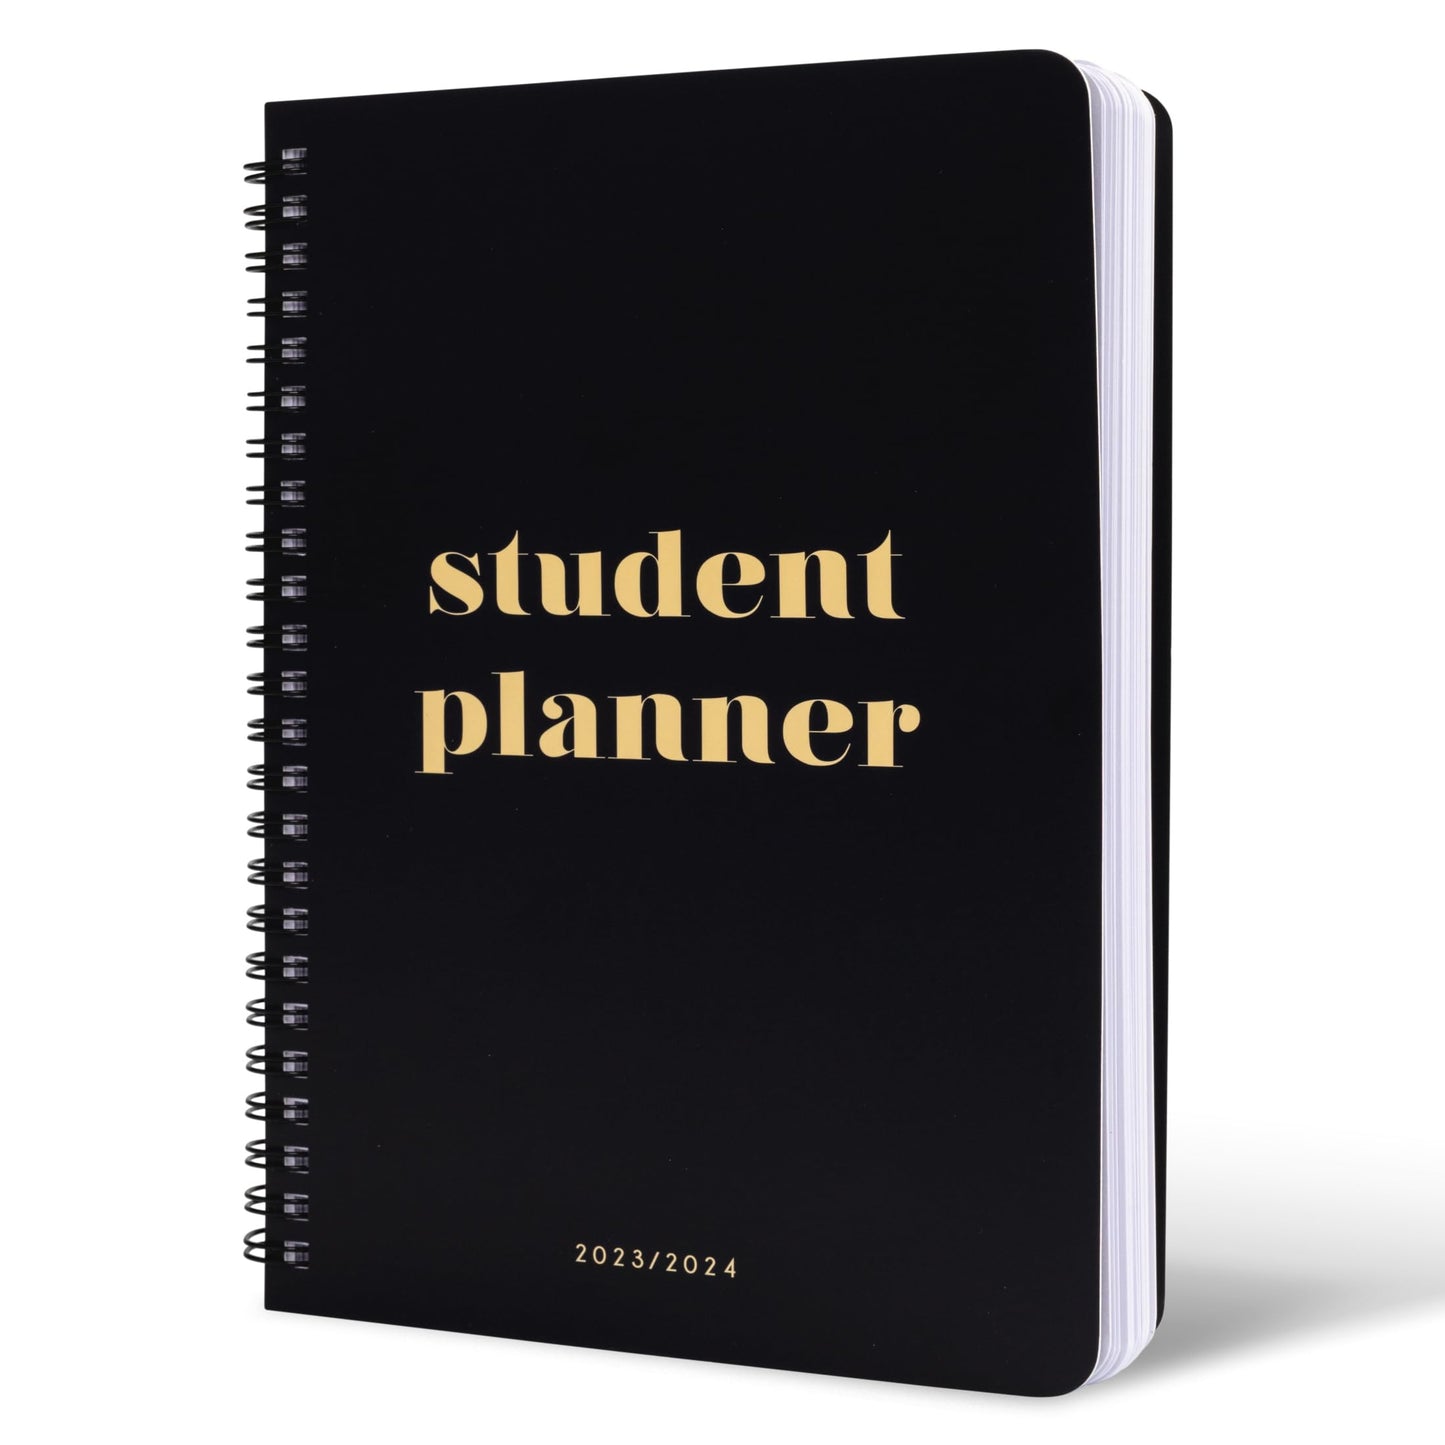 Simplified 2023-2024 Student Planner To Stay Organized - A Beautiful 8.5" x 5.5" Planner for Middle and High School Students with Weekly & Monthly Spreads For The 23-24 Academic Year